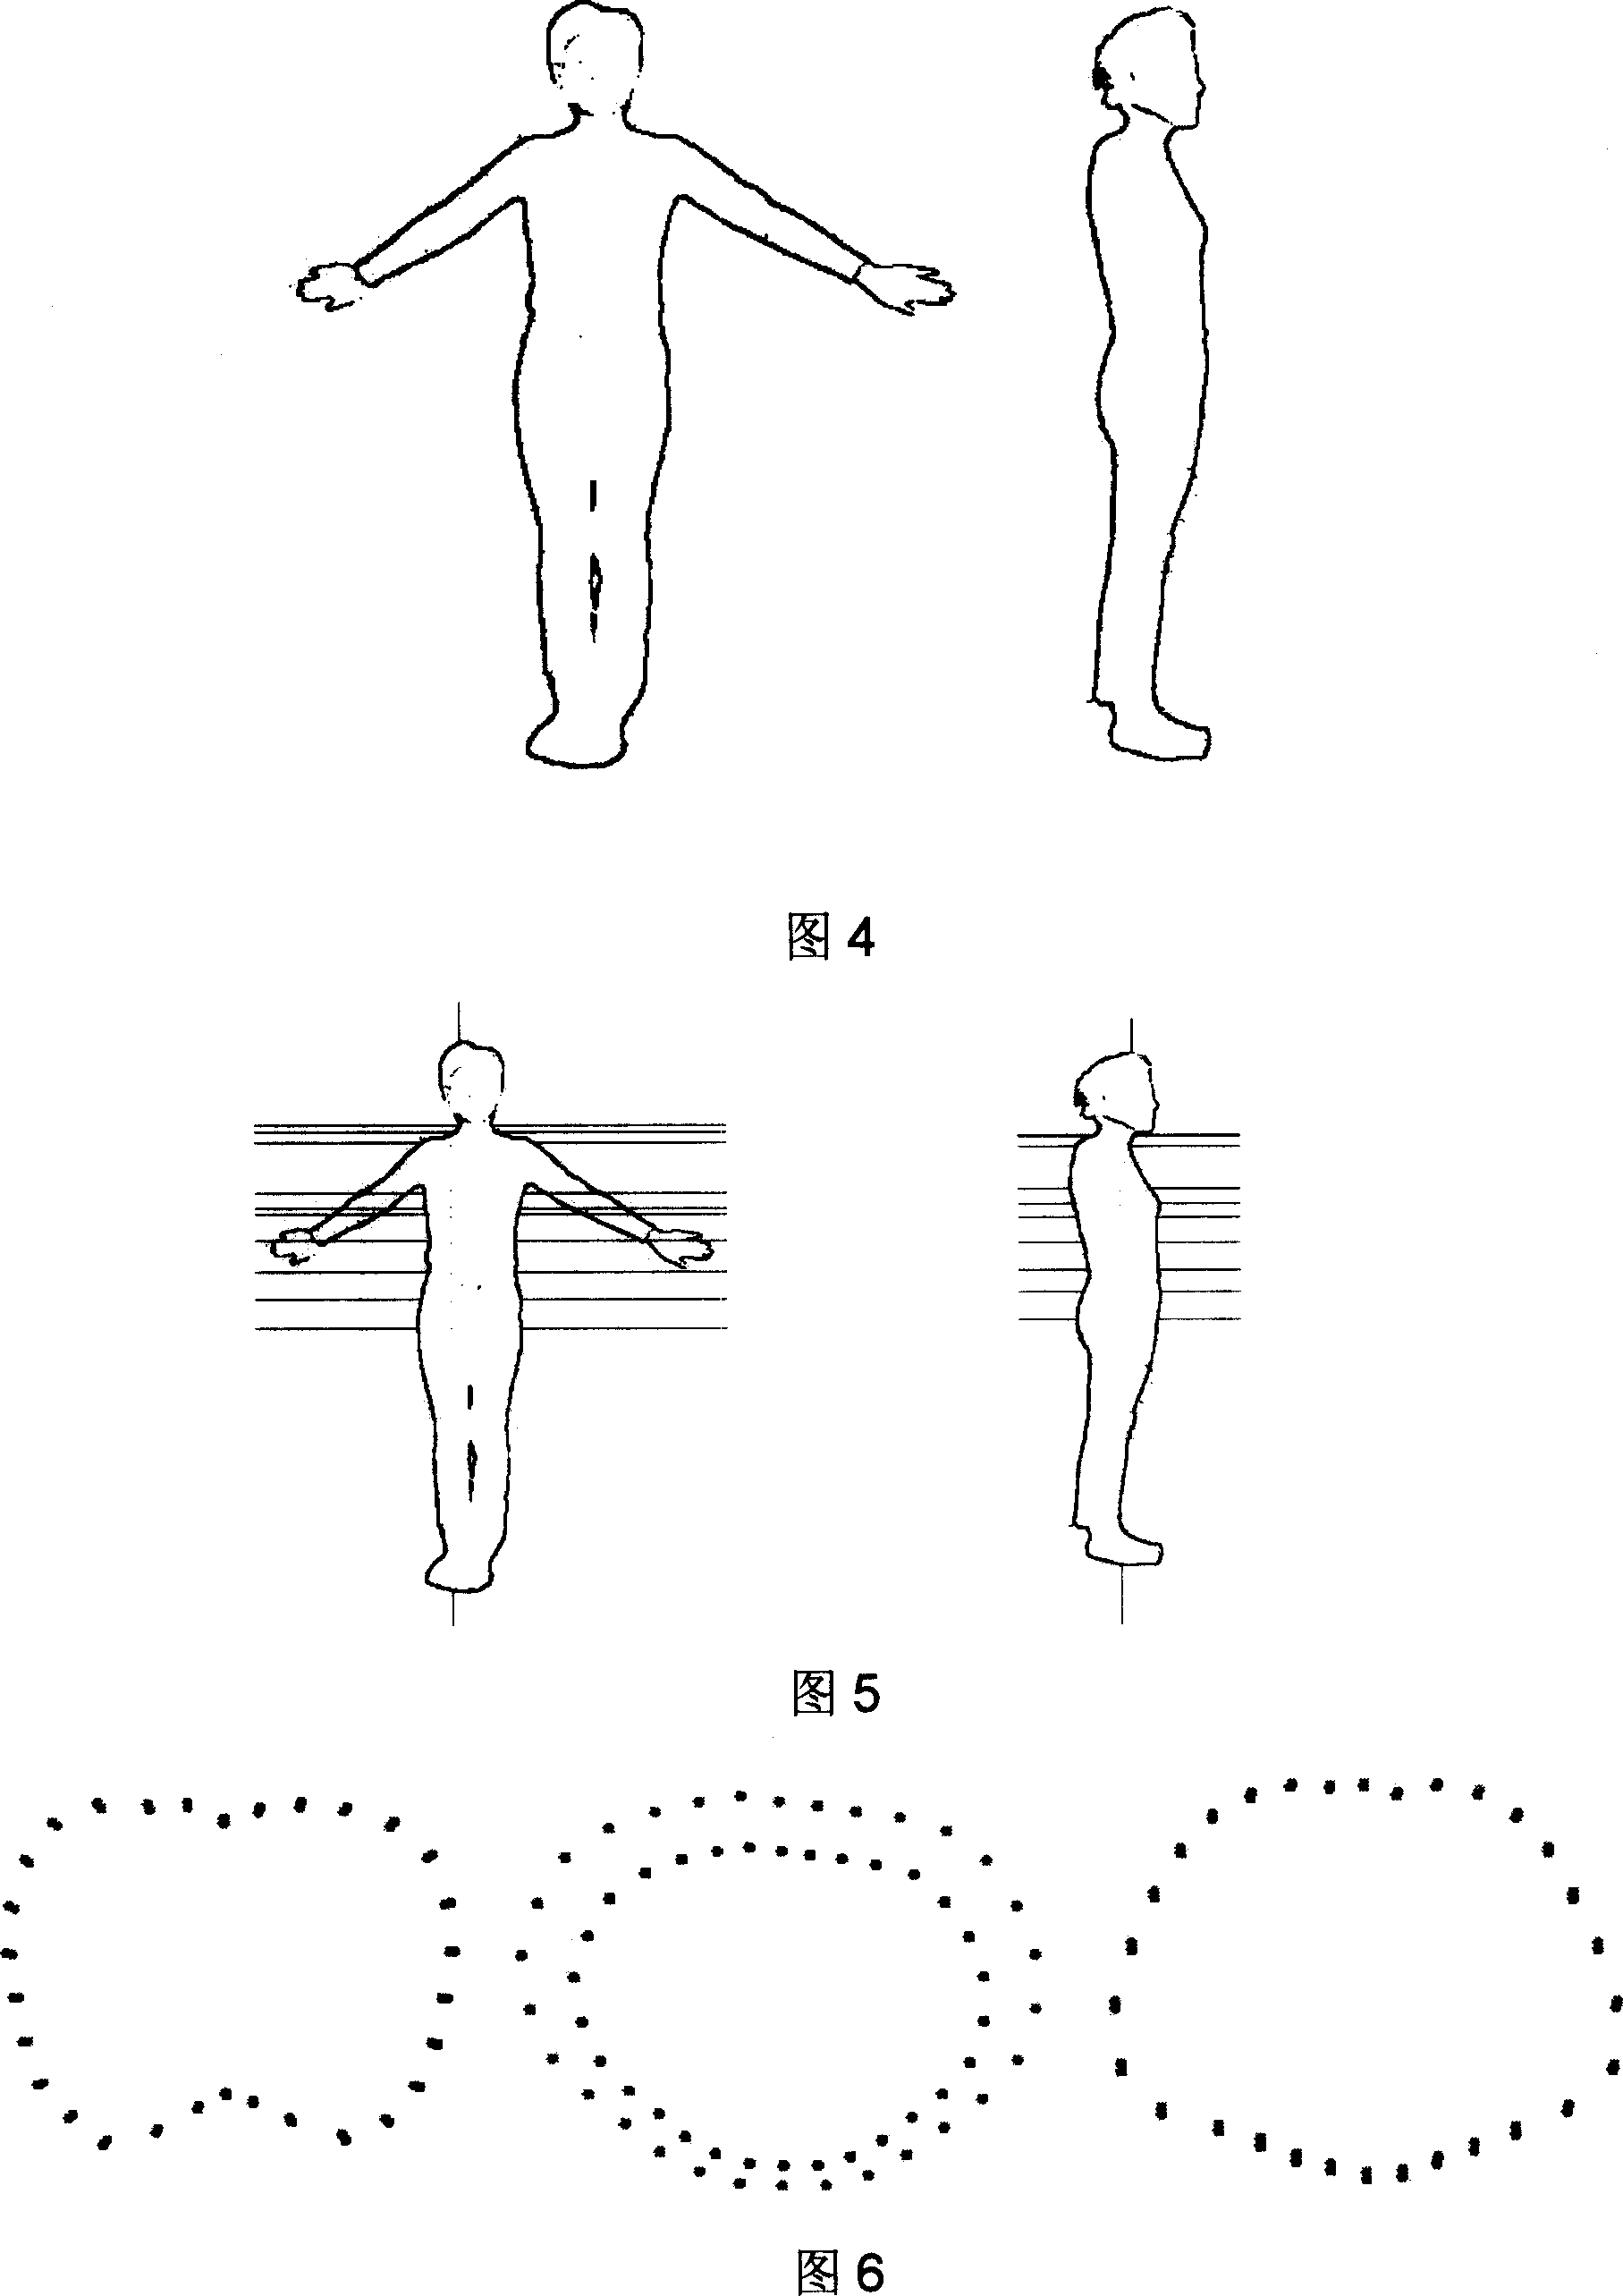 Method for automatically forming 3D virtual human body based on human component template and body profile